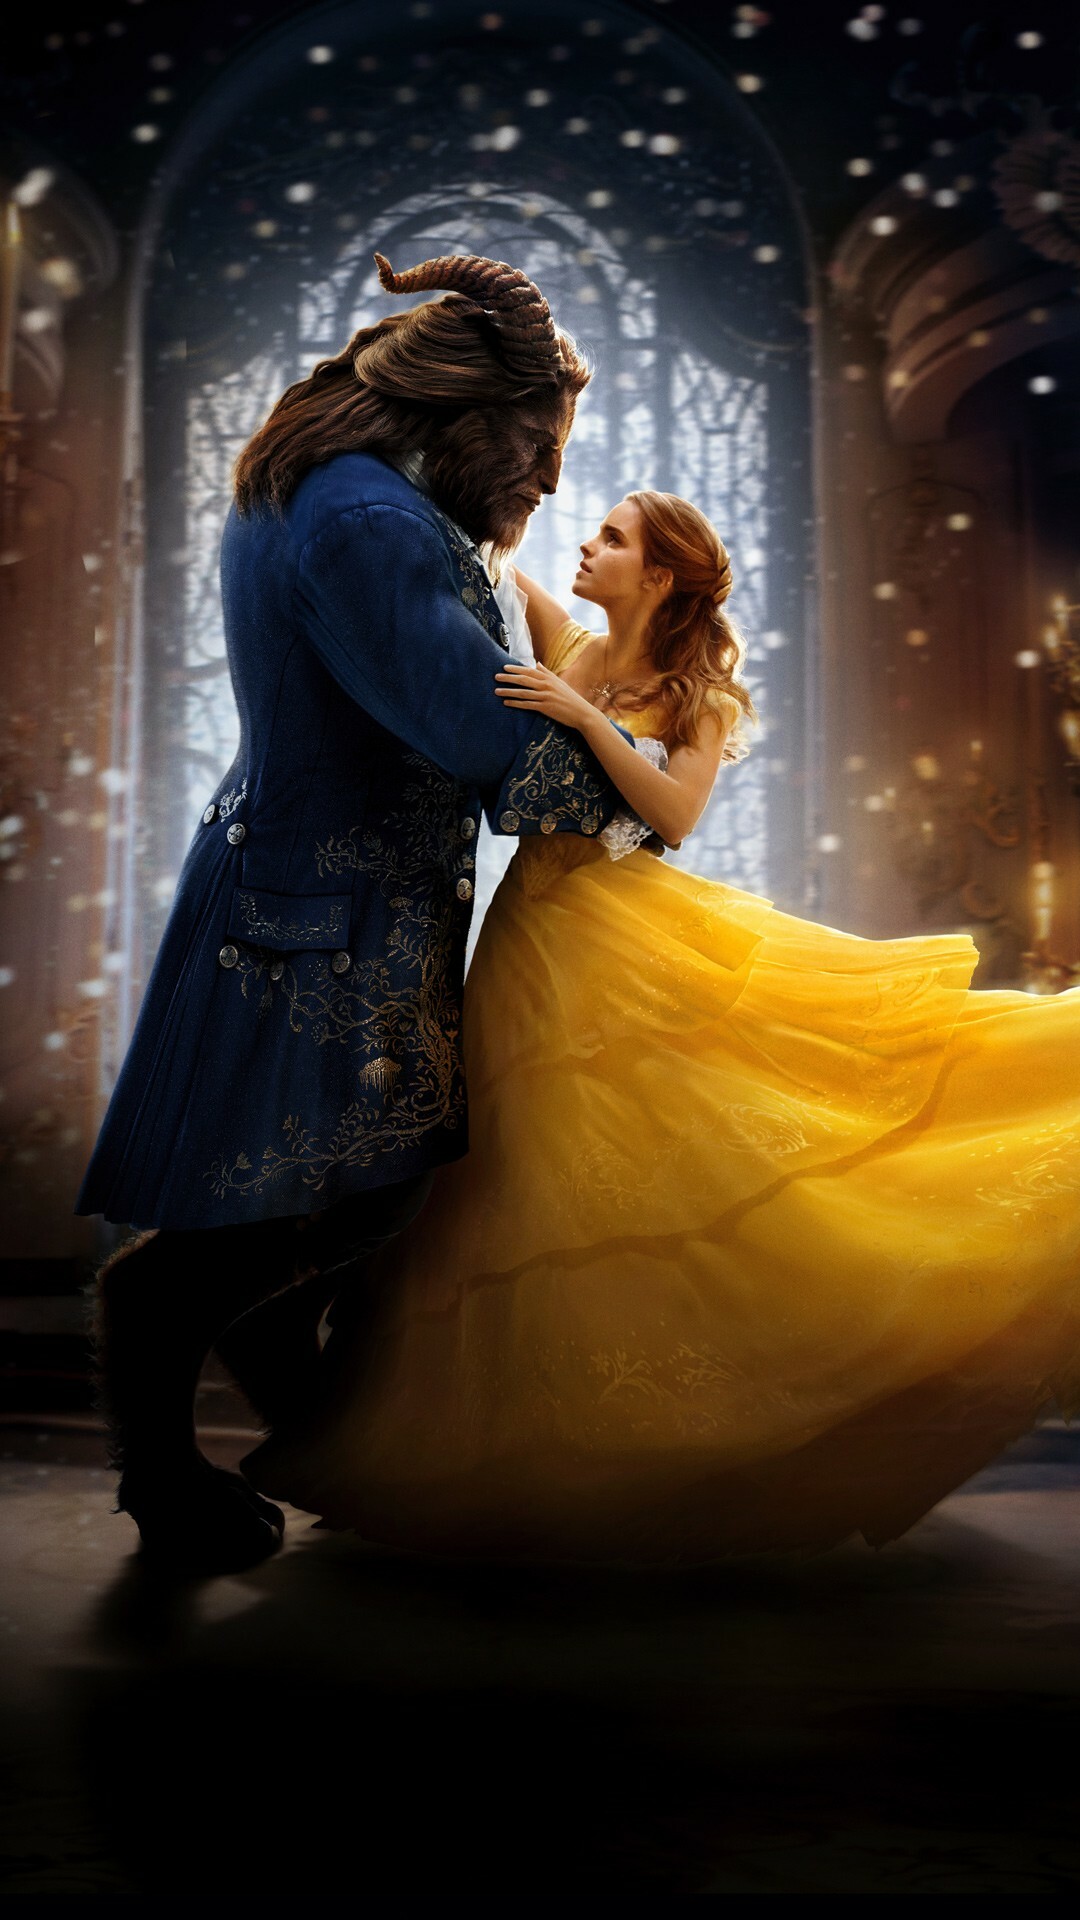 Beauty and the Beast: 2017 remake, Combines animated scenes with live-action performances. 1080x1920 Full HD Wallpaper.